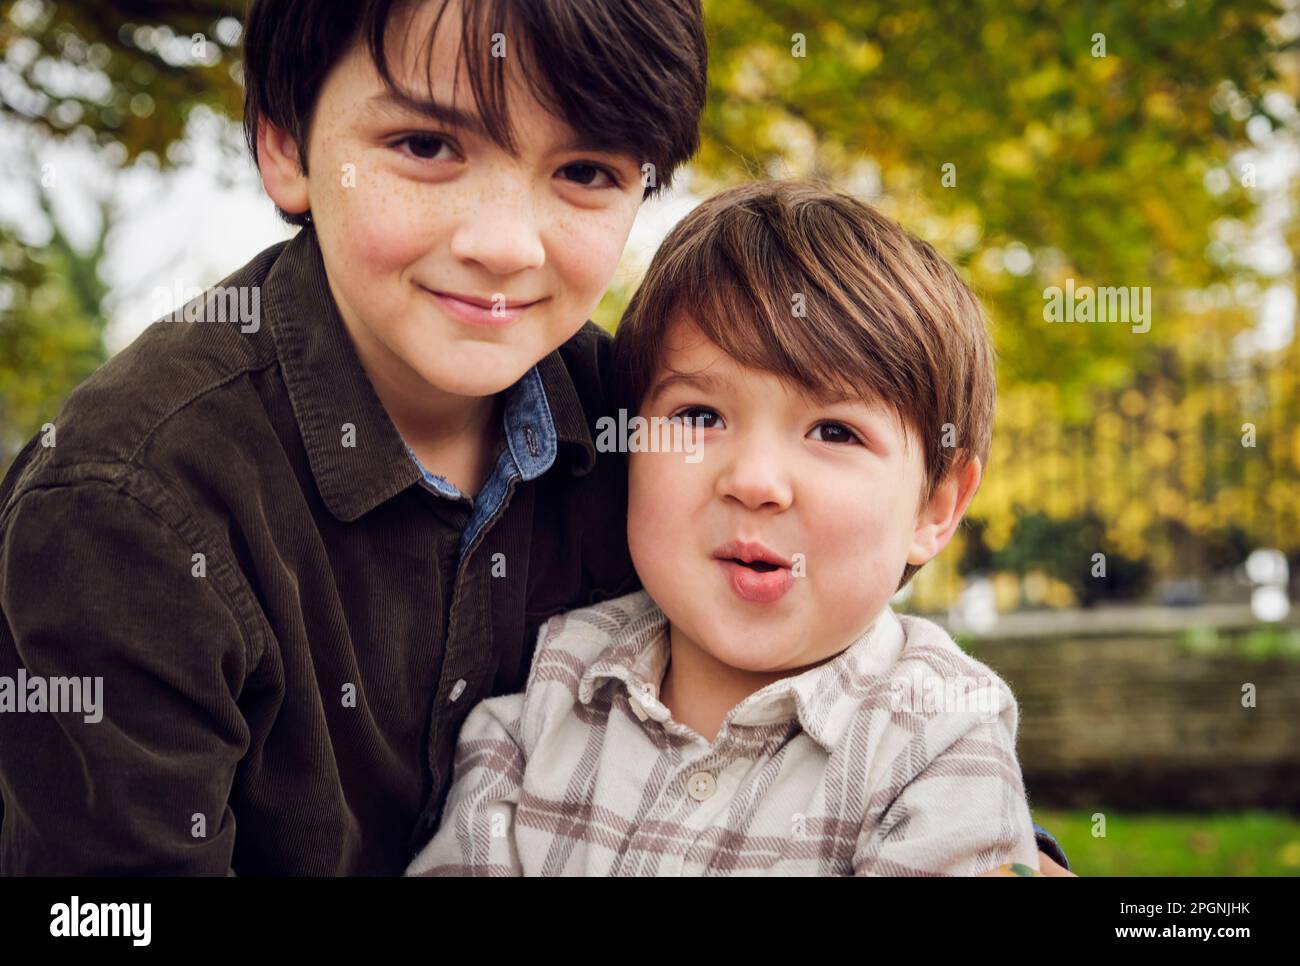 Cute brothers wearing casual clothing at park Stock Photo